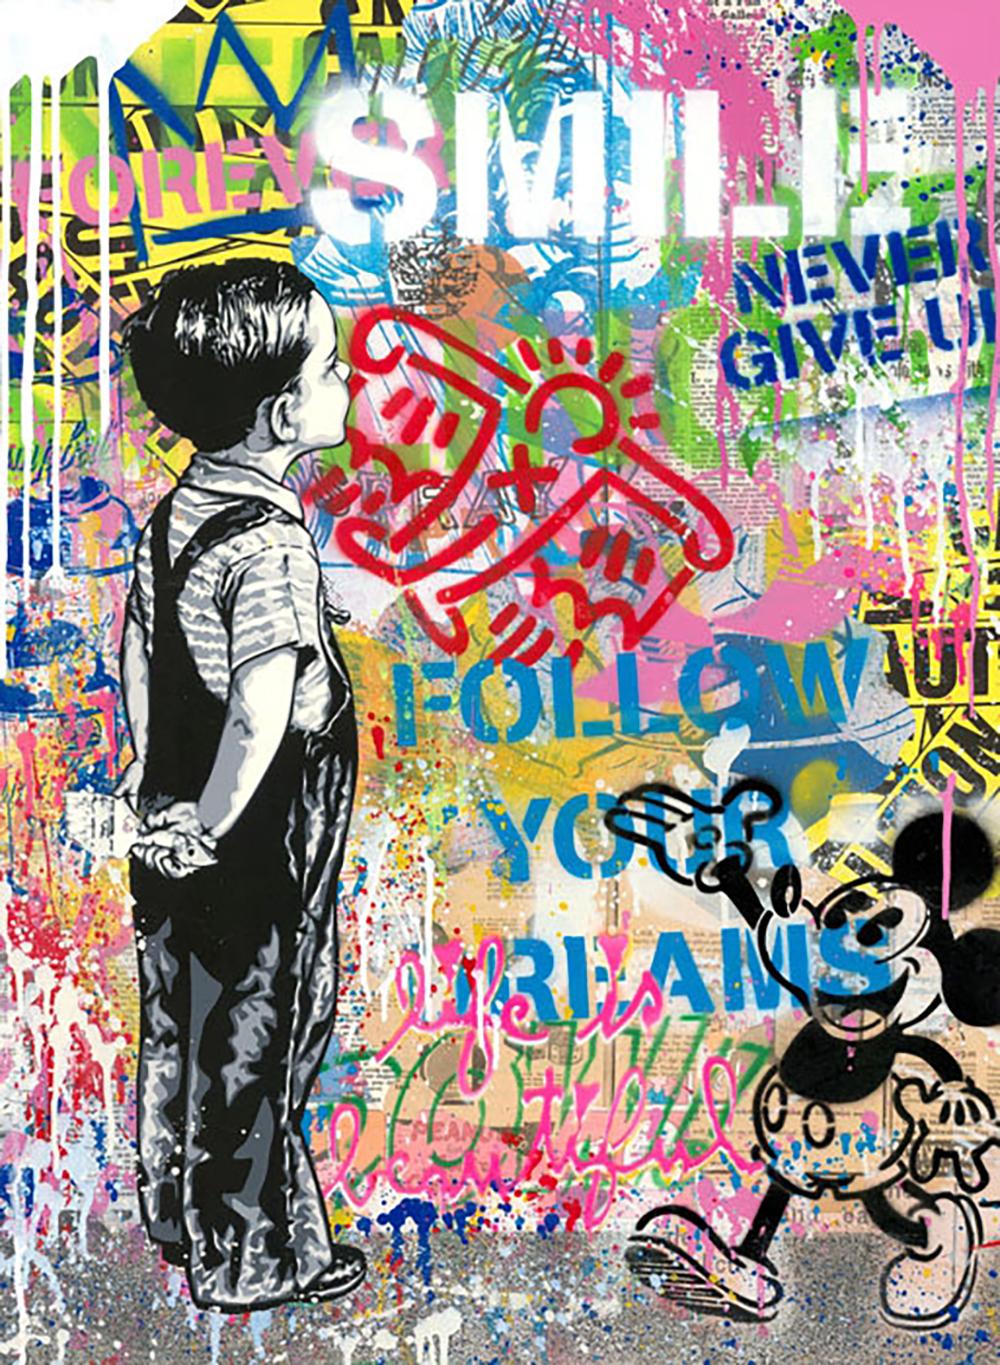 With All My Love - Mixed Media Art by Mr. Brainwash